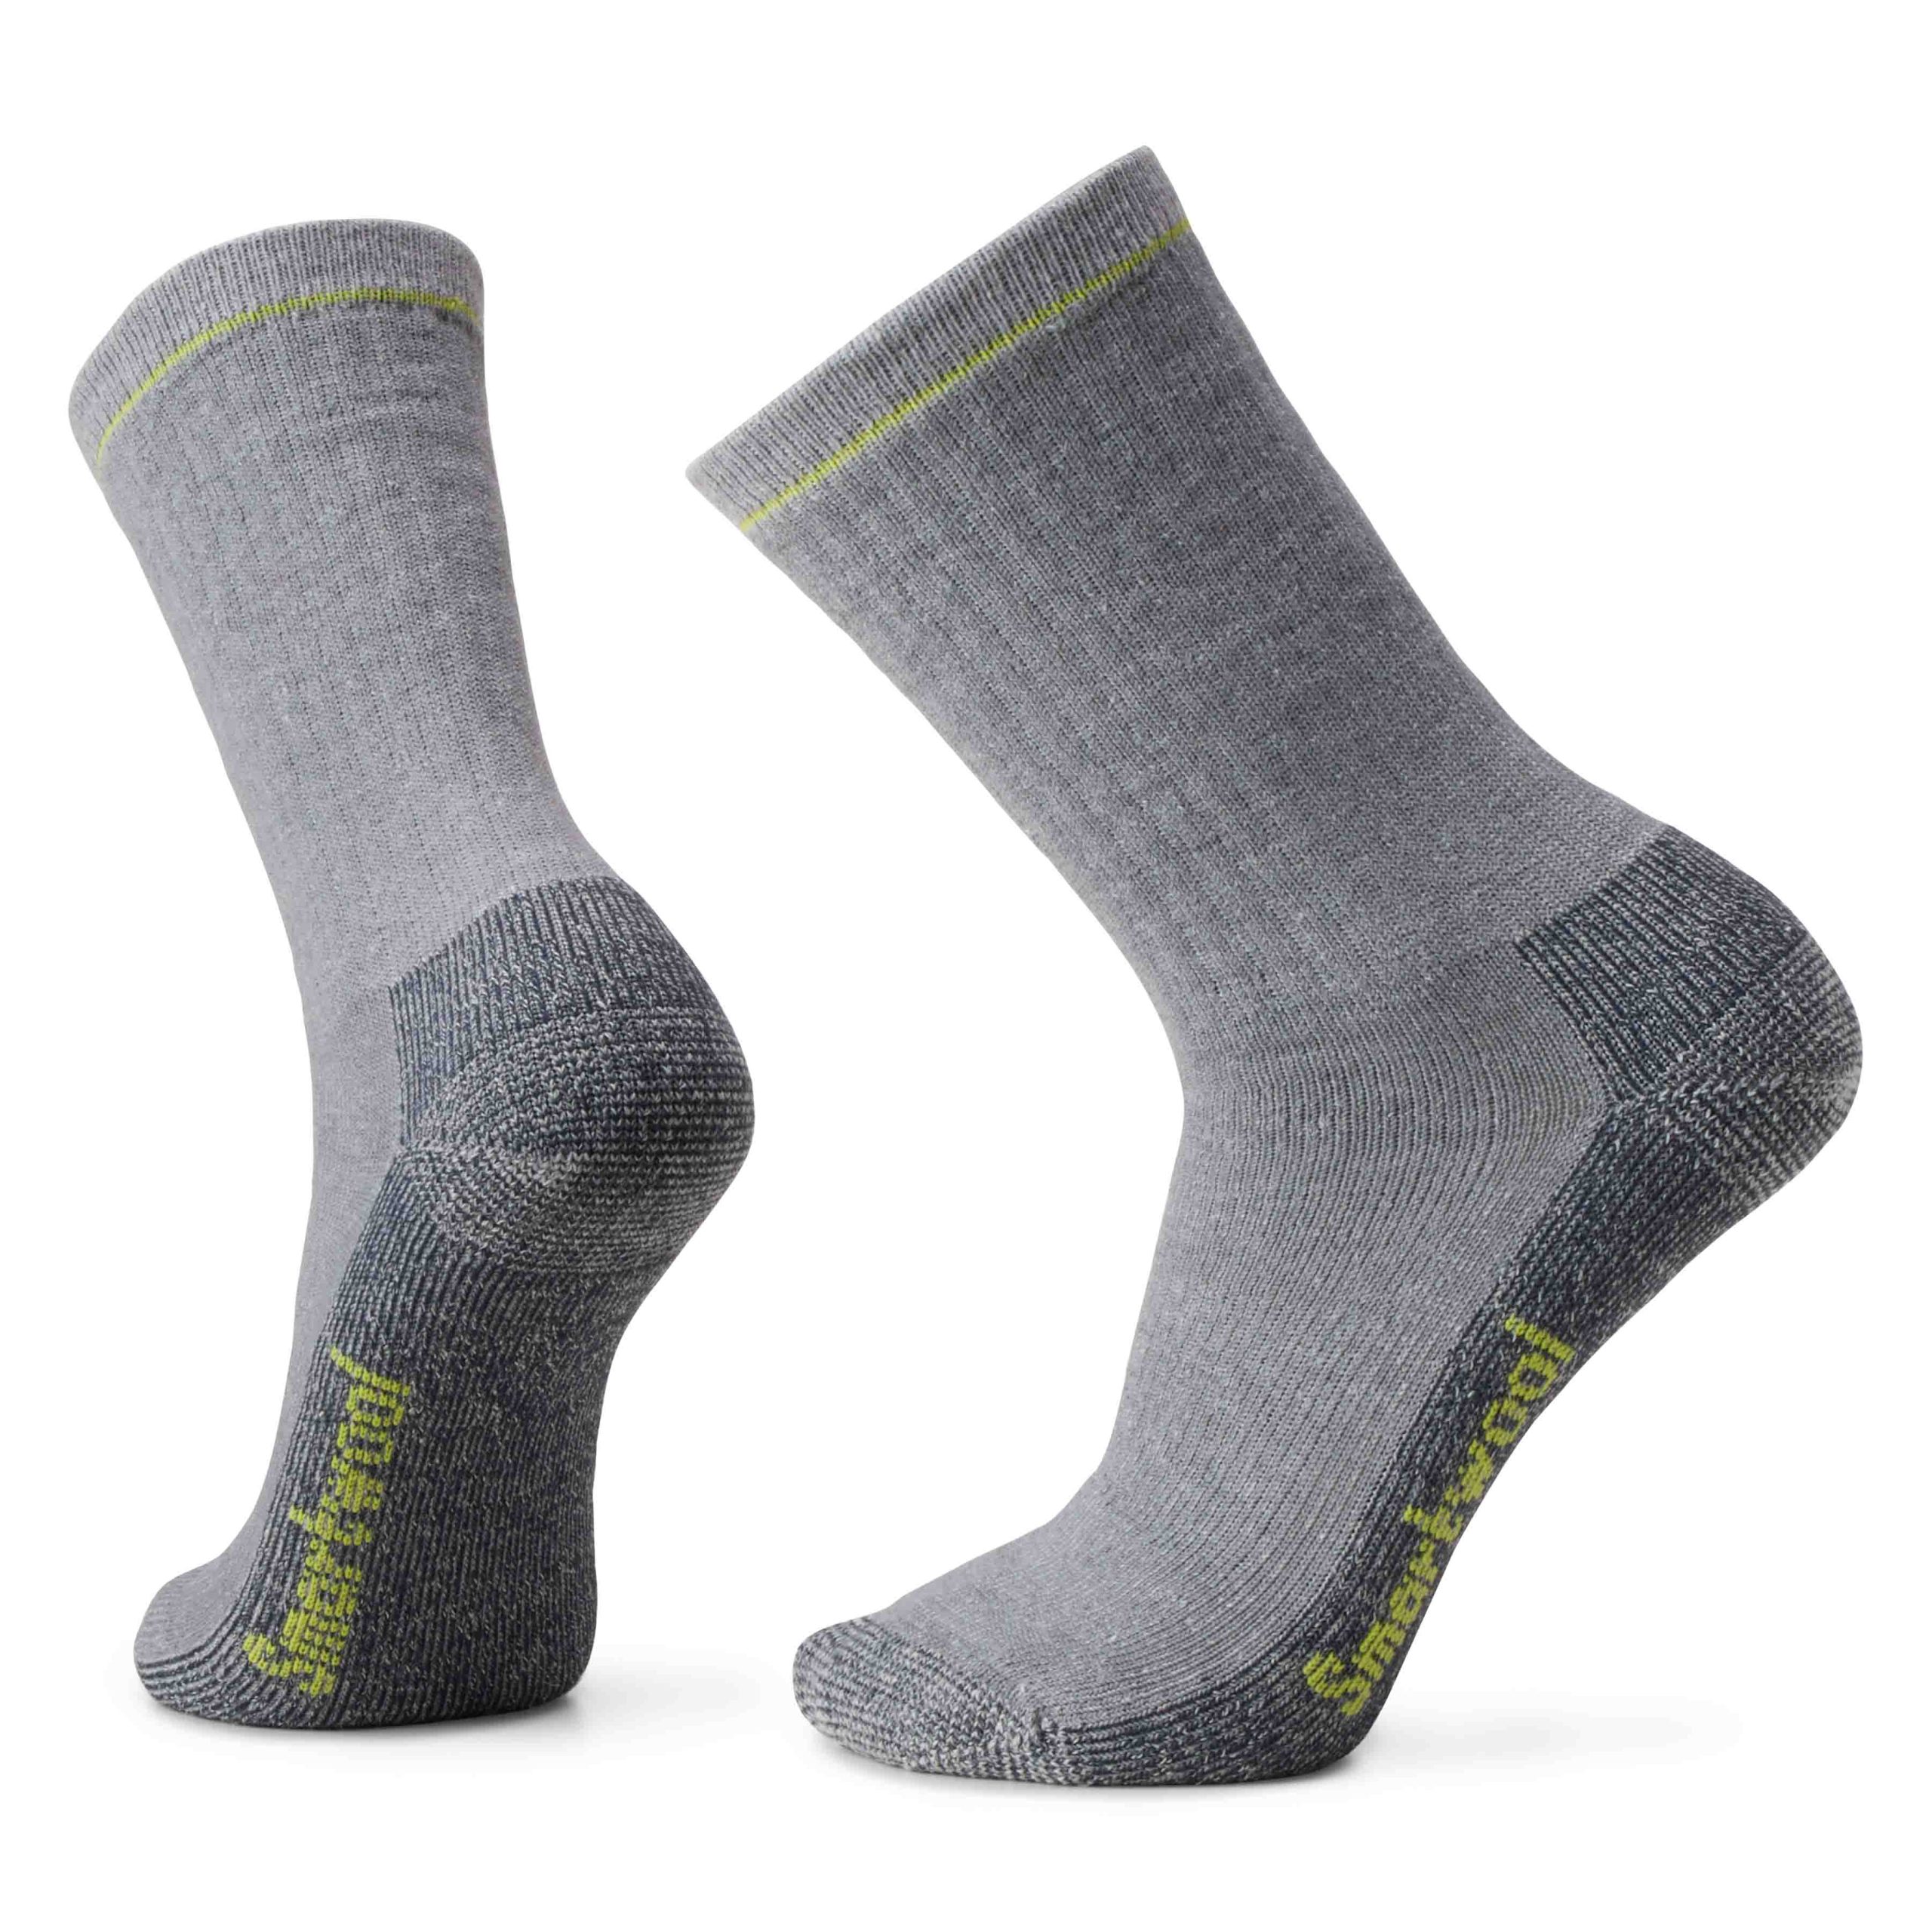 https://www.just-style.com/wp-content/uploads/sites/27/2023/04/sock-scaled.jpg